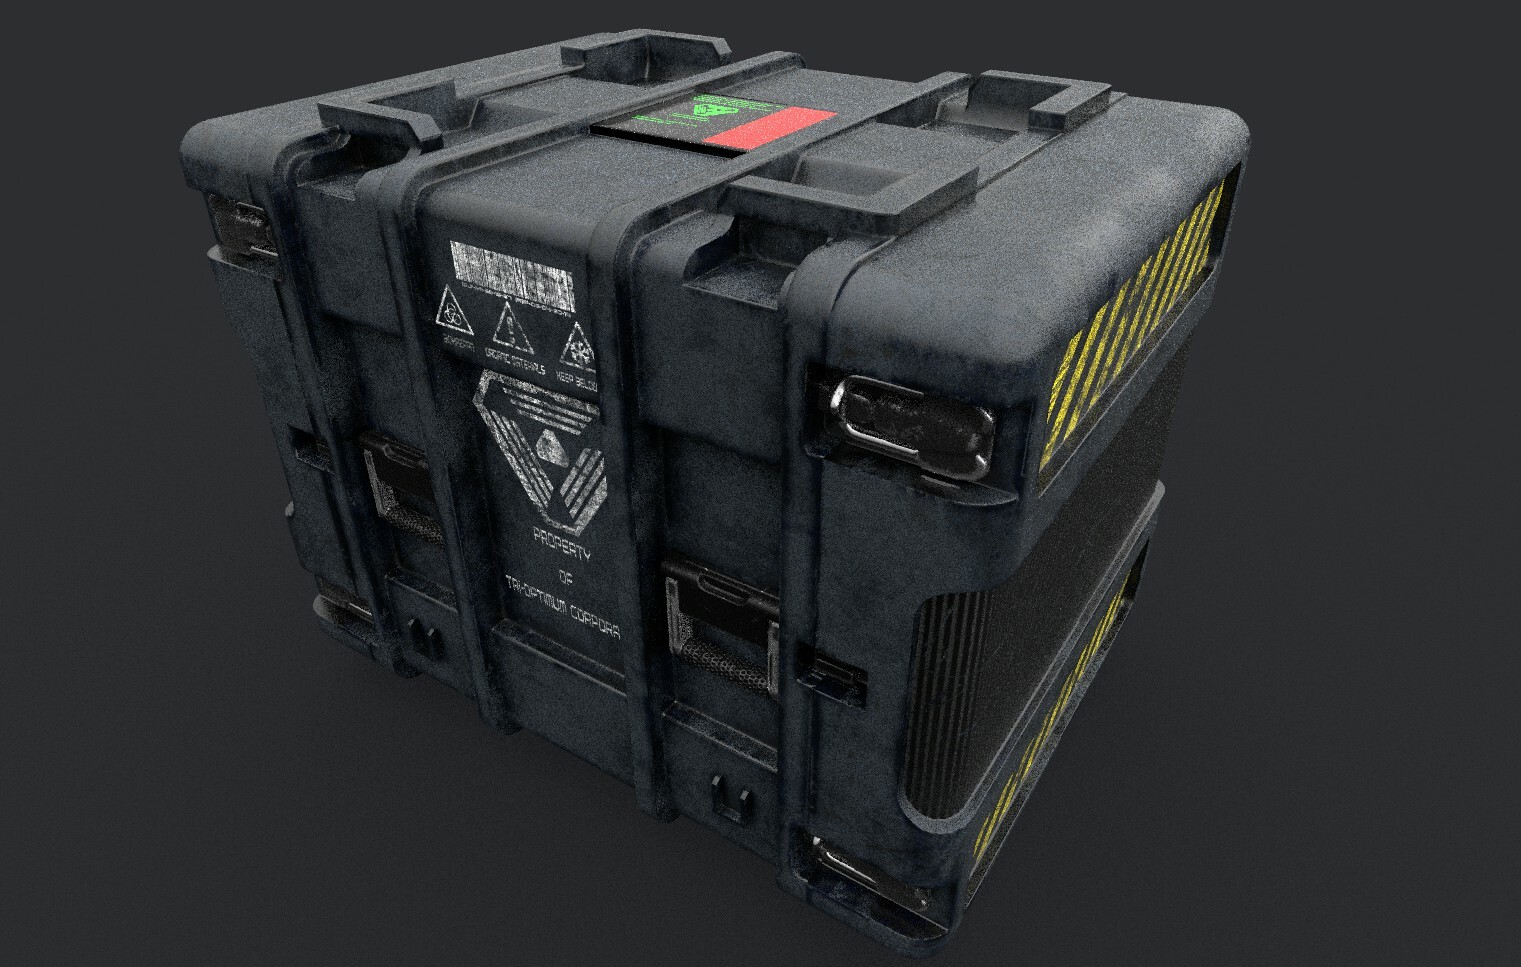 Another render of the crate in Substance Painter, showing the LCD panel on the top.